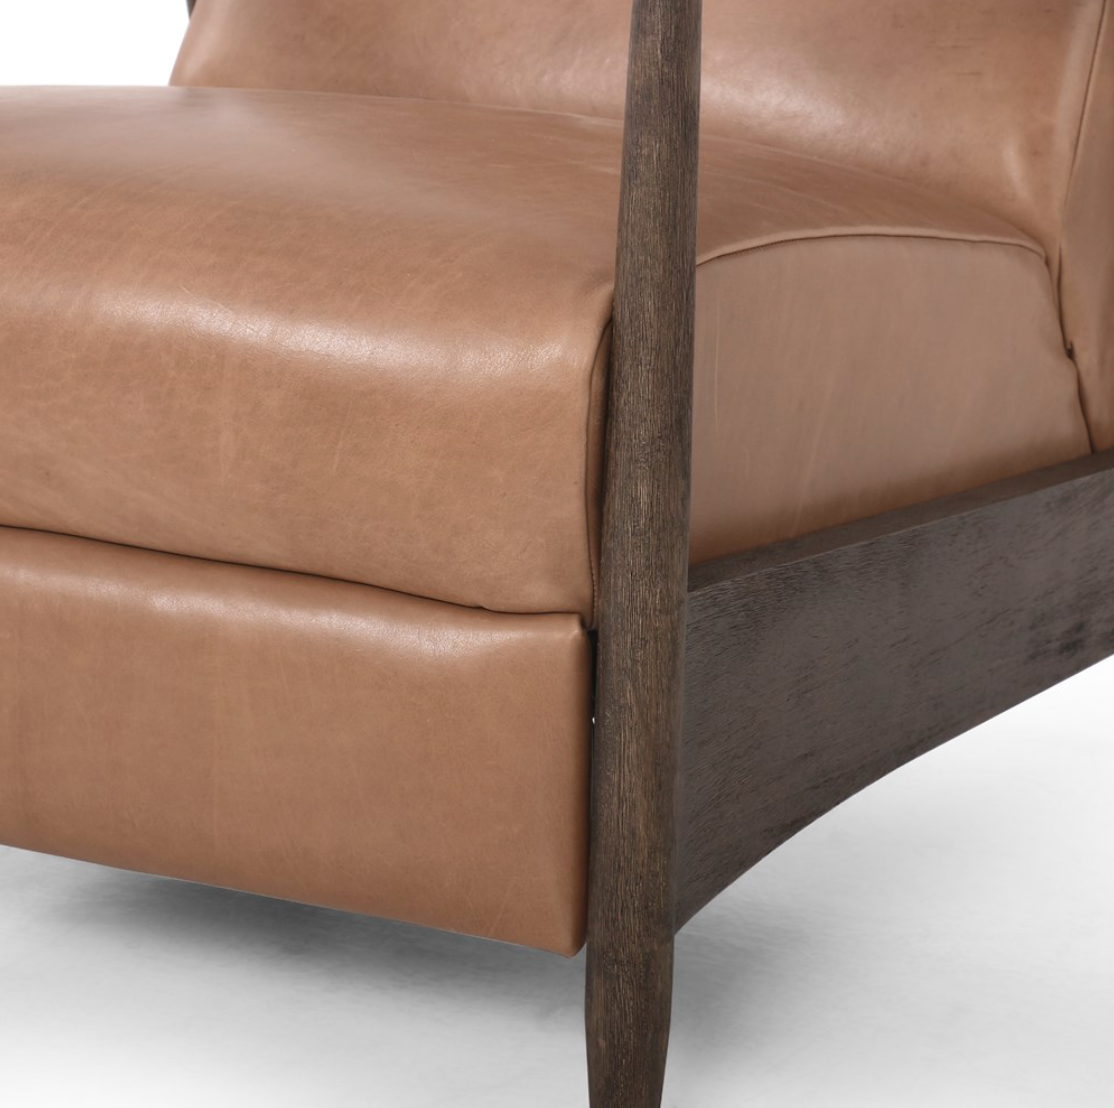 The craftsmanship of the sophisticated Braden Recliner seen here in Dakota Warm Taupe is second to none. With its soft leather and silhouette, this recliner will look great in your main living space or office. Amethyst Home provides interior design services, furniture, rugs and lighting in the Salt Lake City metro area.